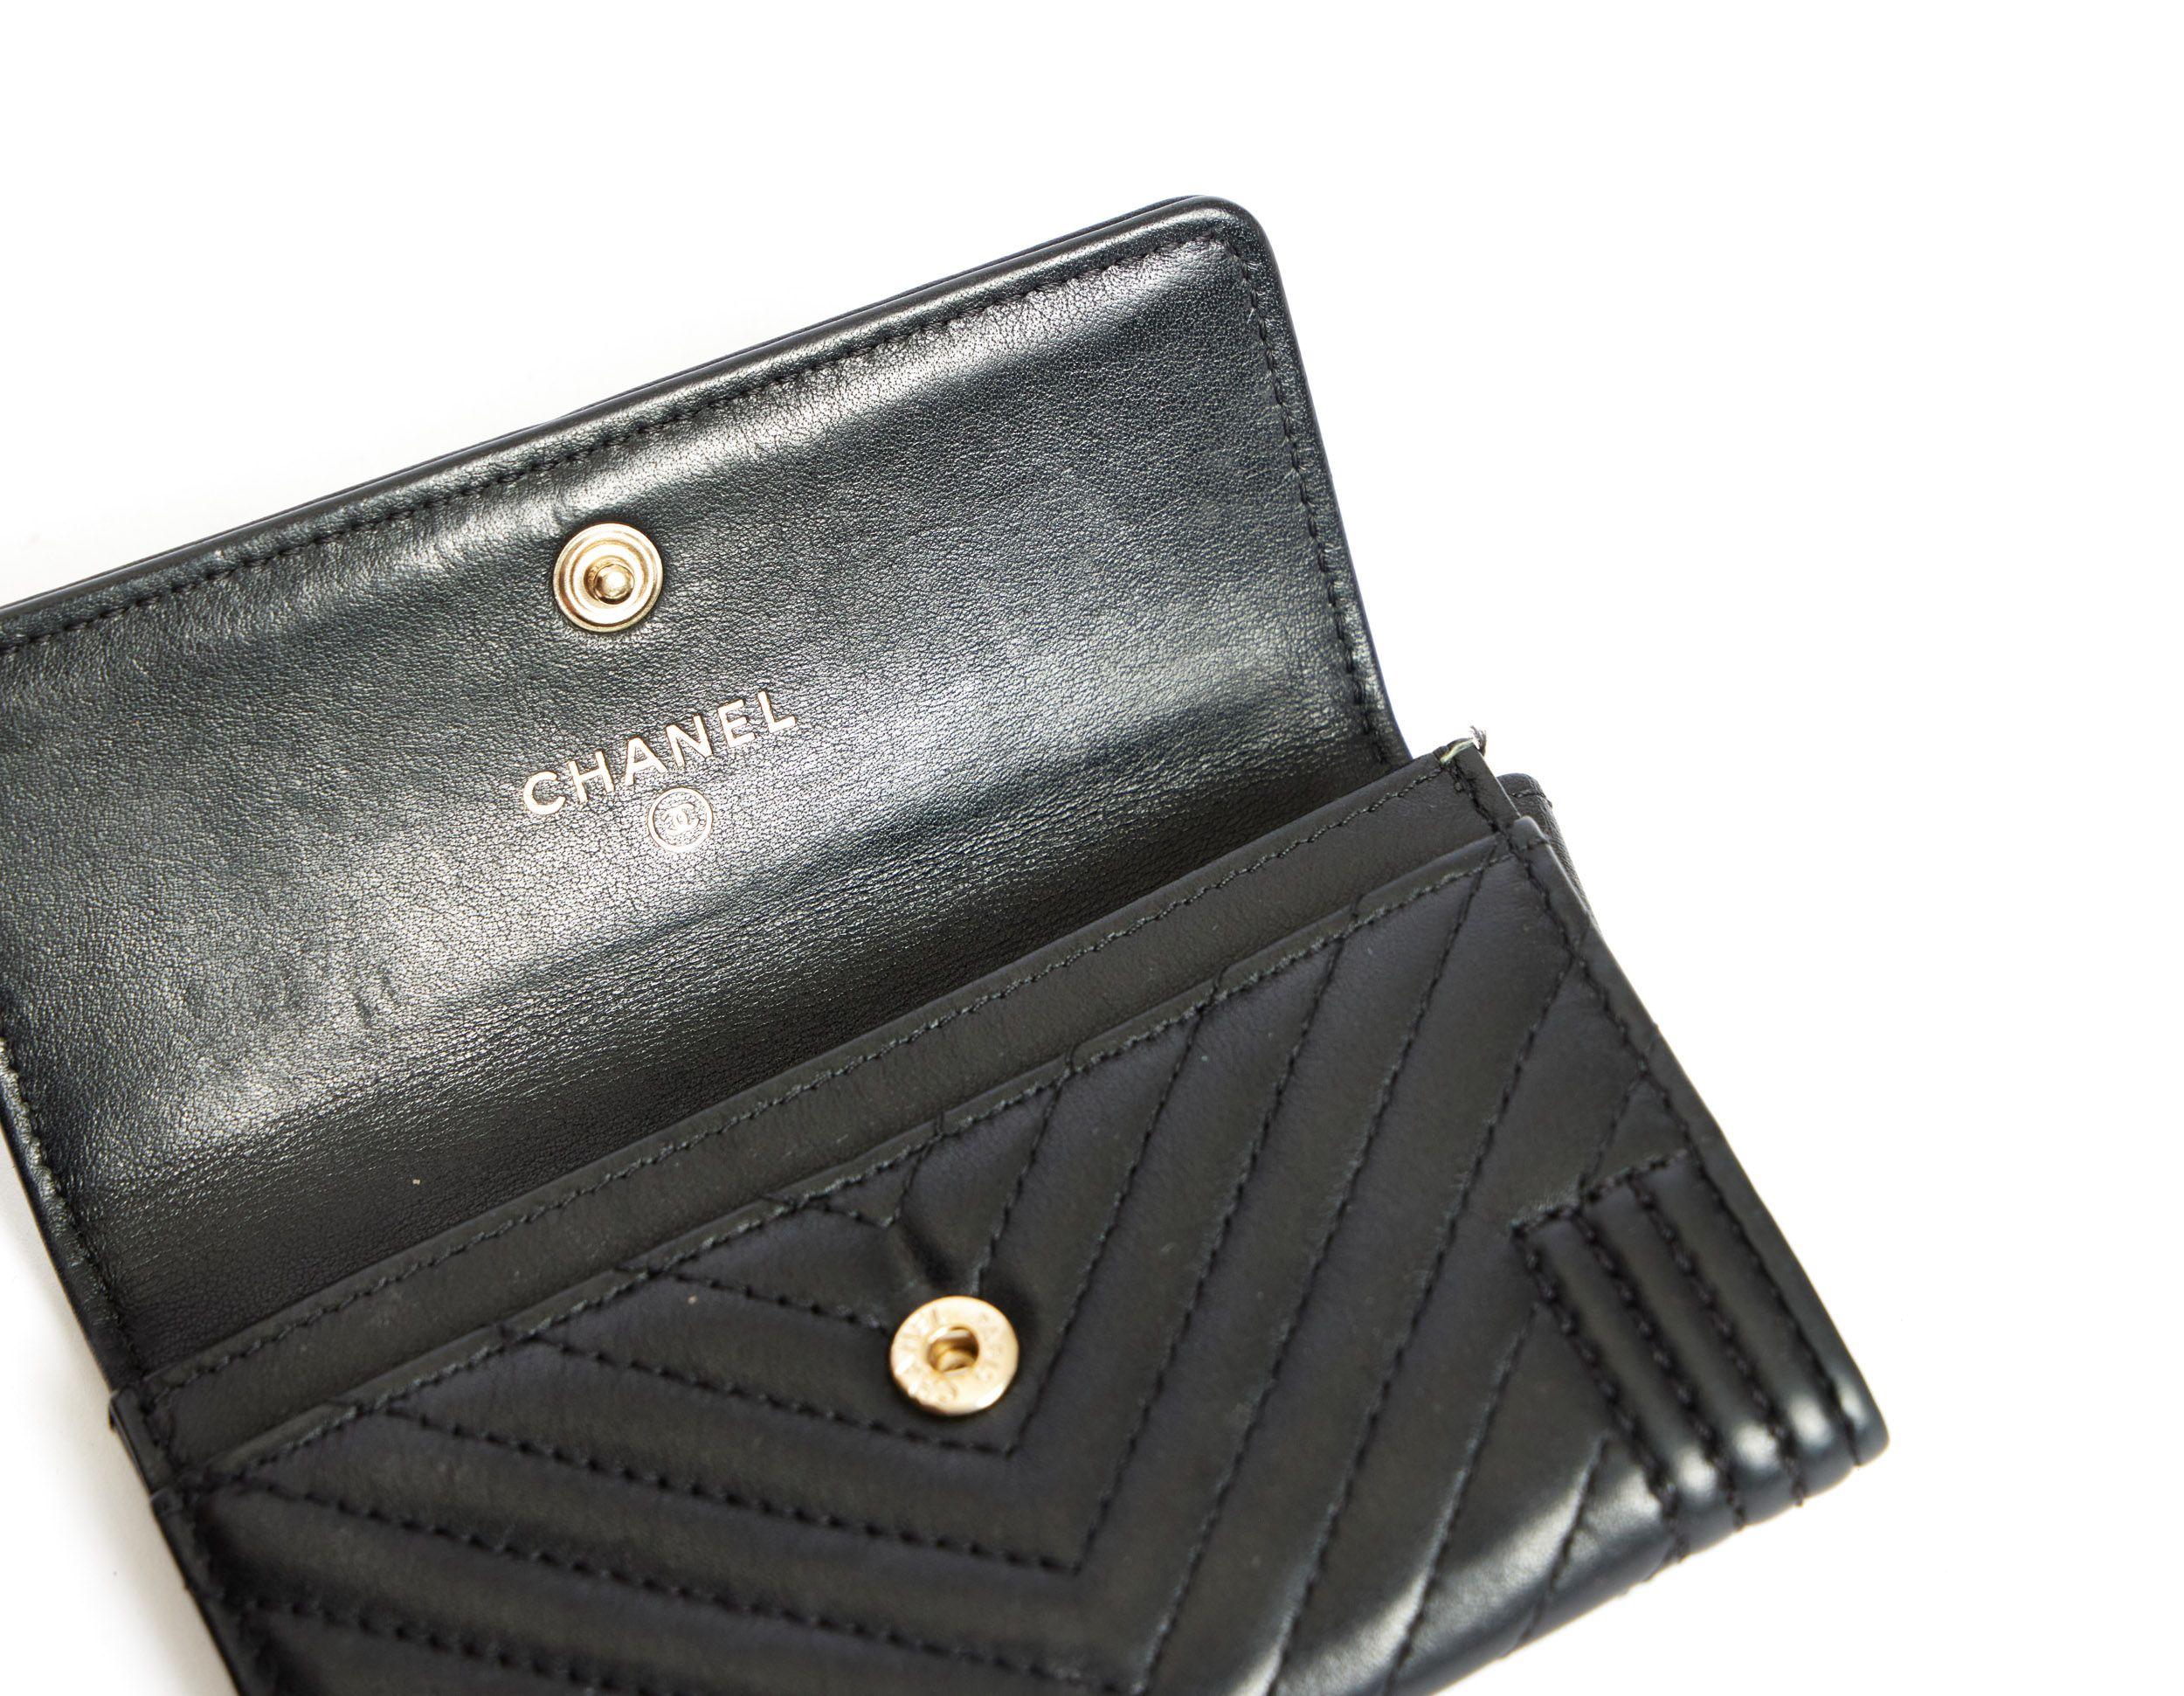 Chanel Credit Card Case Mint Black Chevron  In Excellent Condition For Sale In West Hollywood, CA